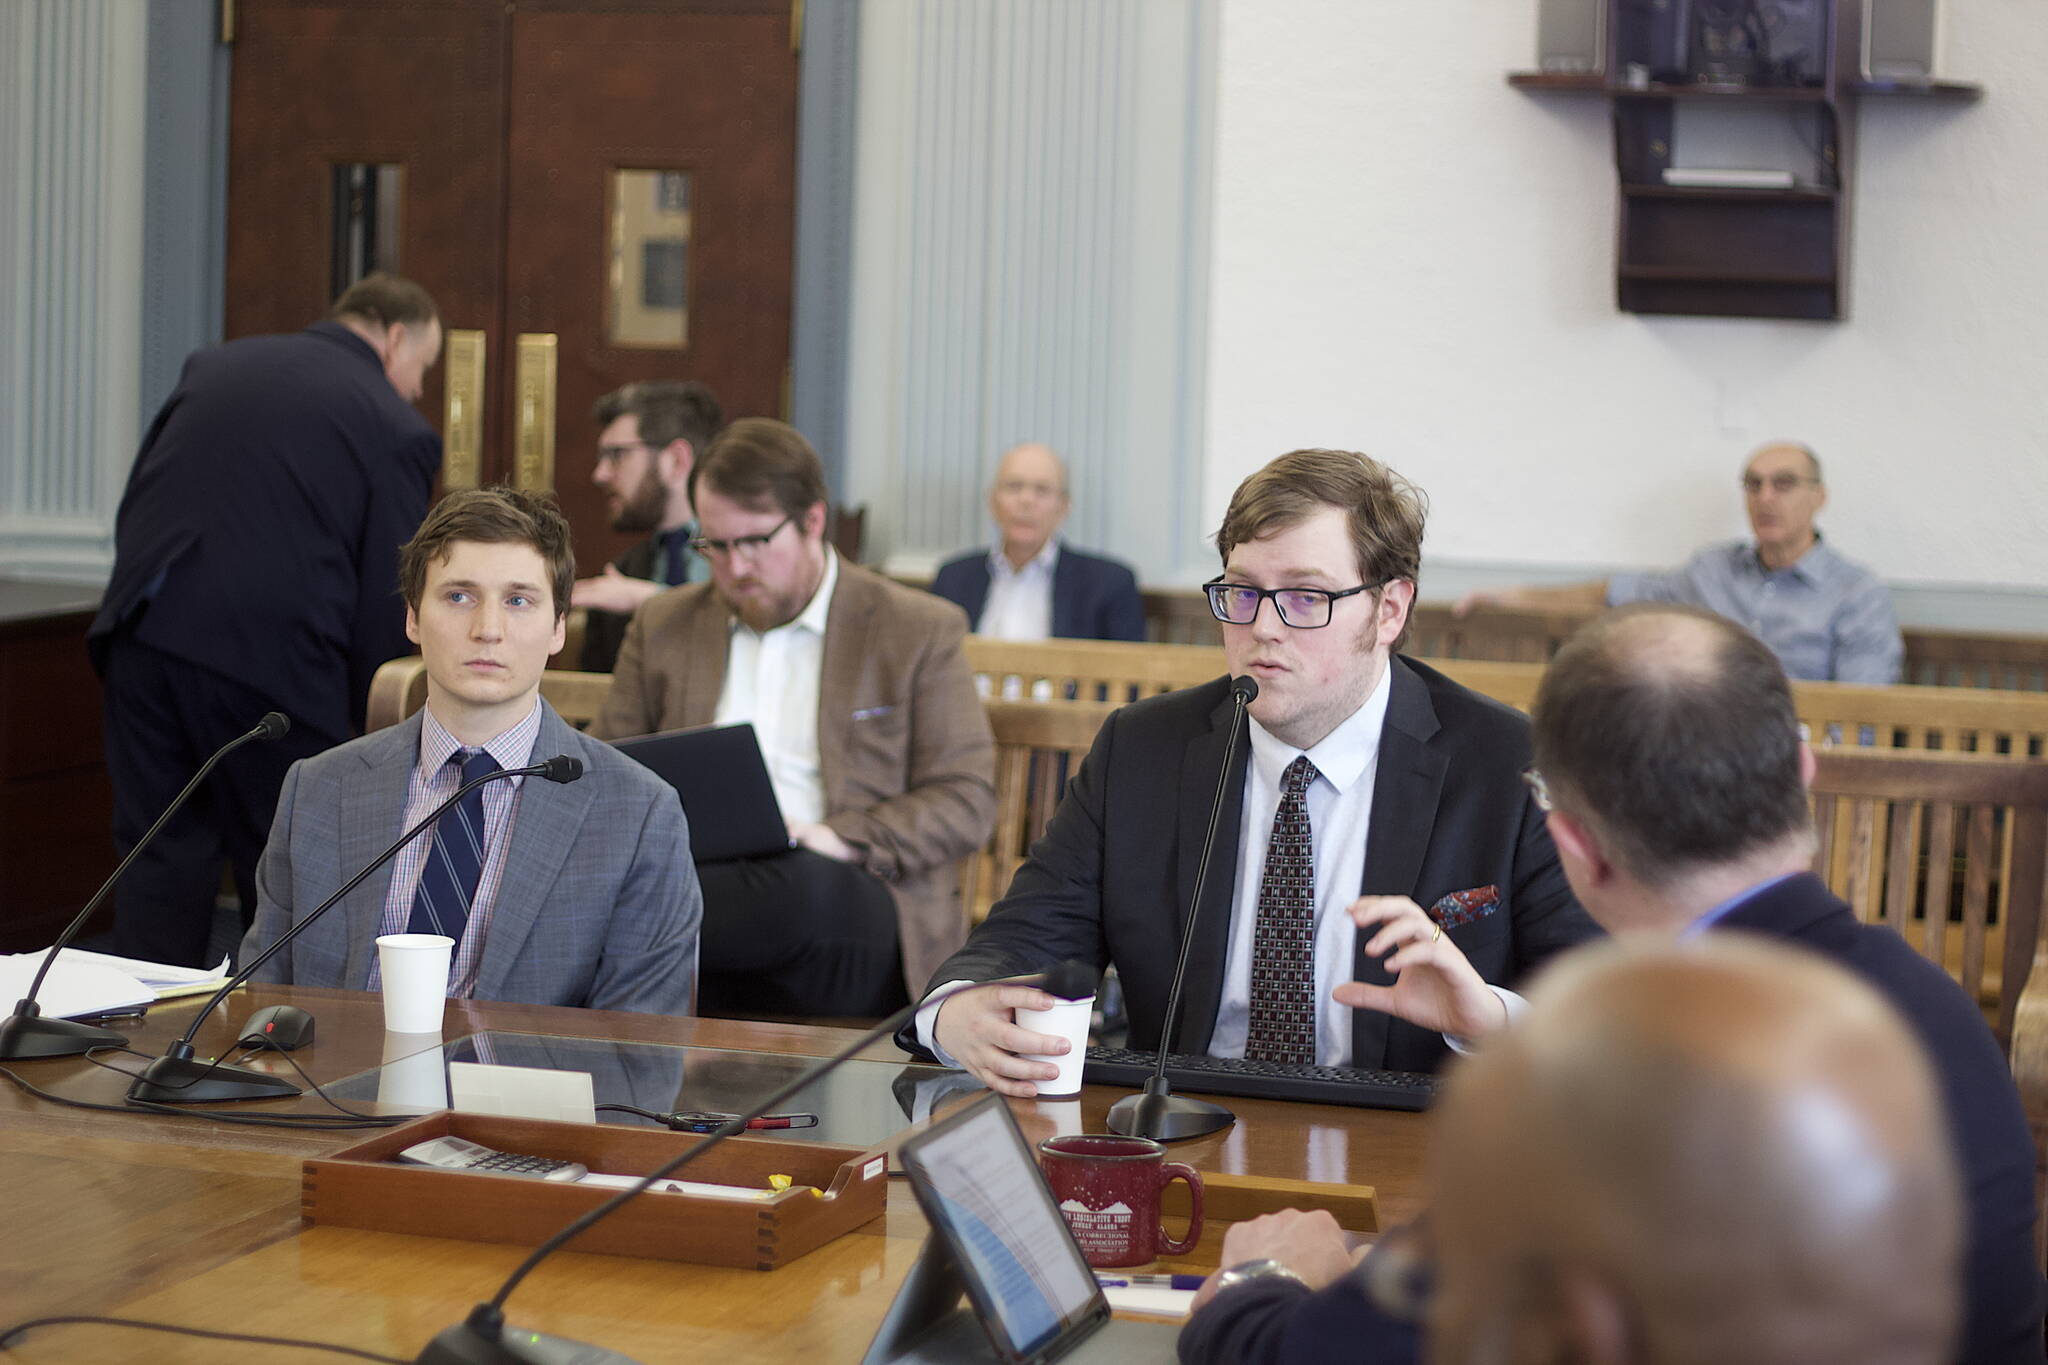 Legislative fiscal analysts Alexei Painter, right, and Conor Bell explain the state’s financial outlook during the next decade to the Senate Finance Committee on Friday. (Mark Sabbatini / Juneau Empire)